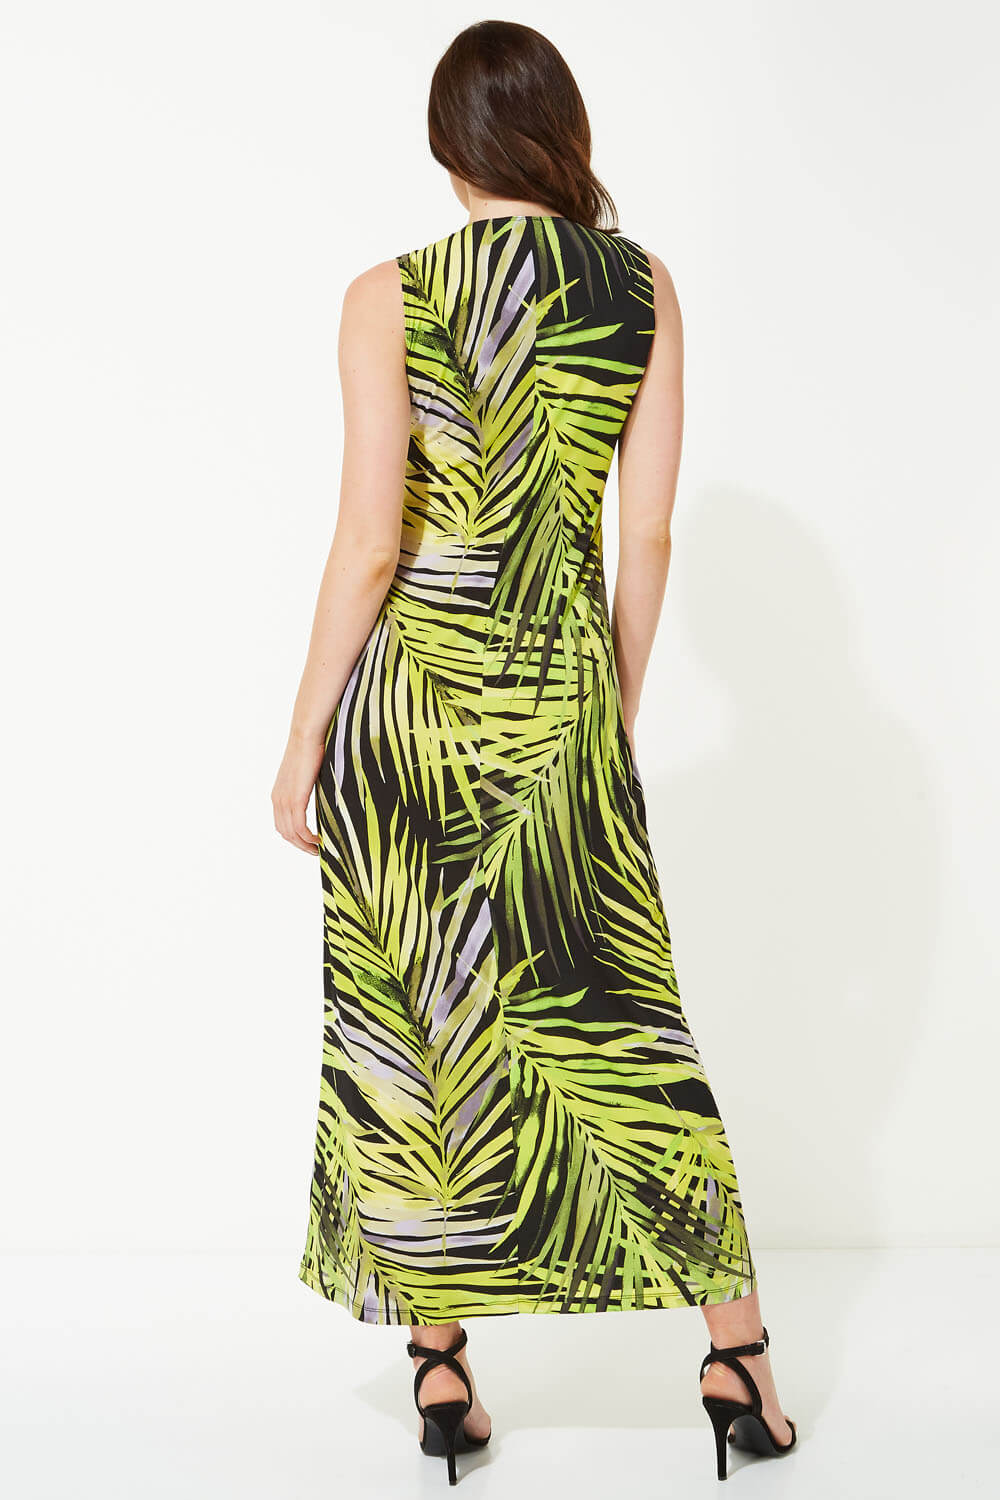 Lime Palm Print Twist Front Maxi Dress, Image 2 of 4